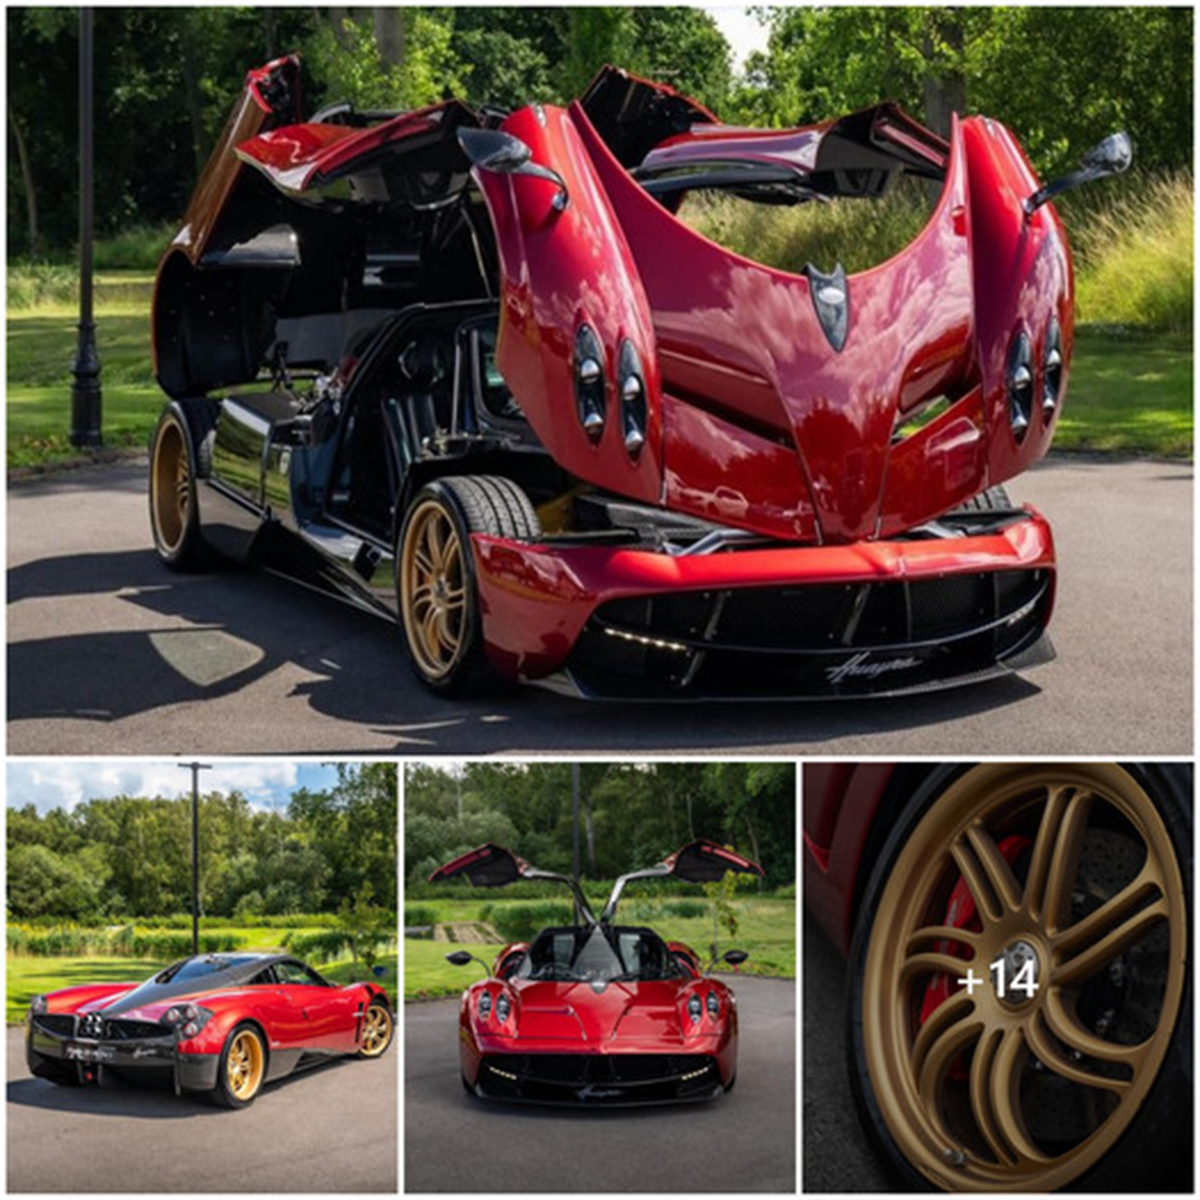 Pagani Huayra R Unveiled – The World’s Most Powerful Road Supercar